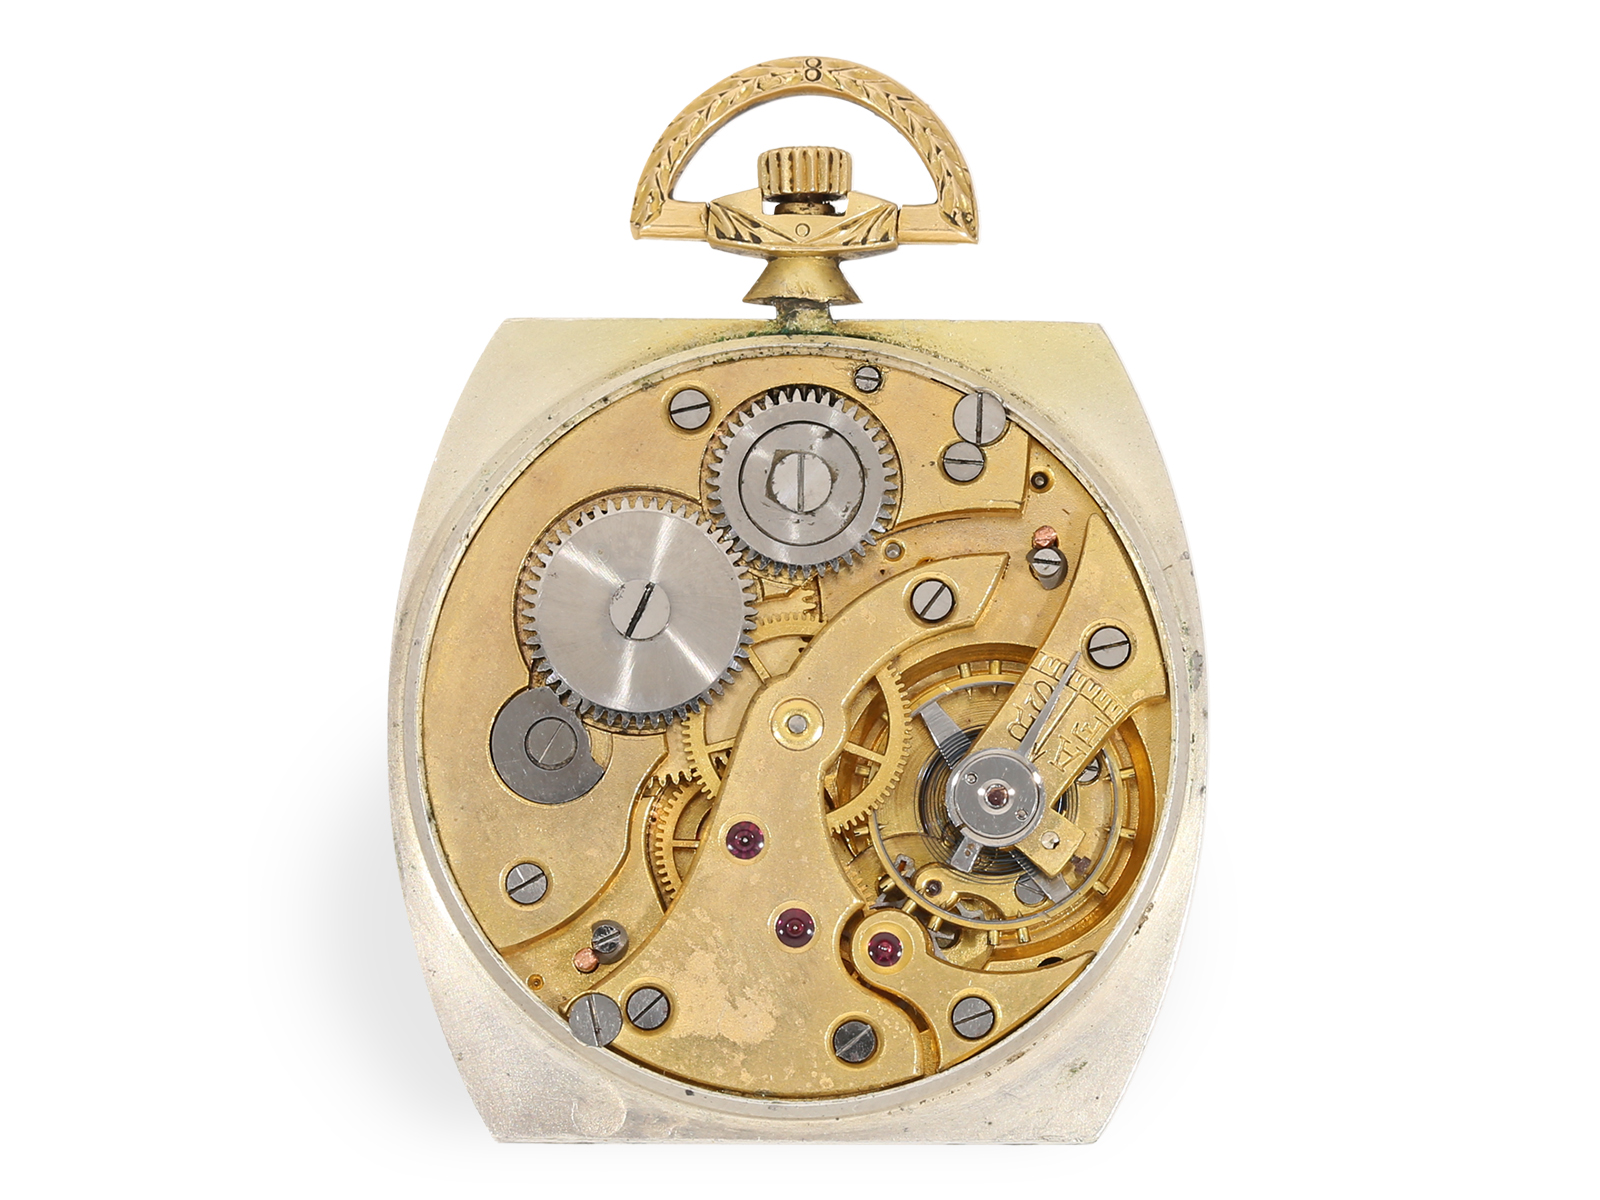 Pocket watch: extremely rare Art Deco gold/enamel dress watch in chronometer quality, ca. 1925 - Image 5 of 6